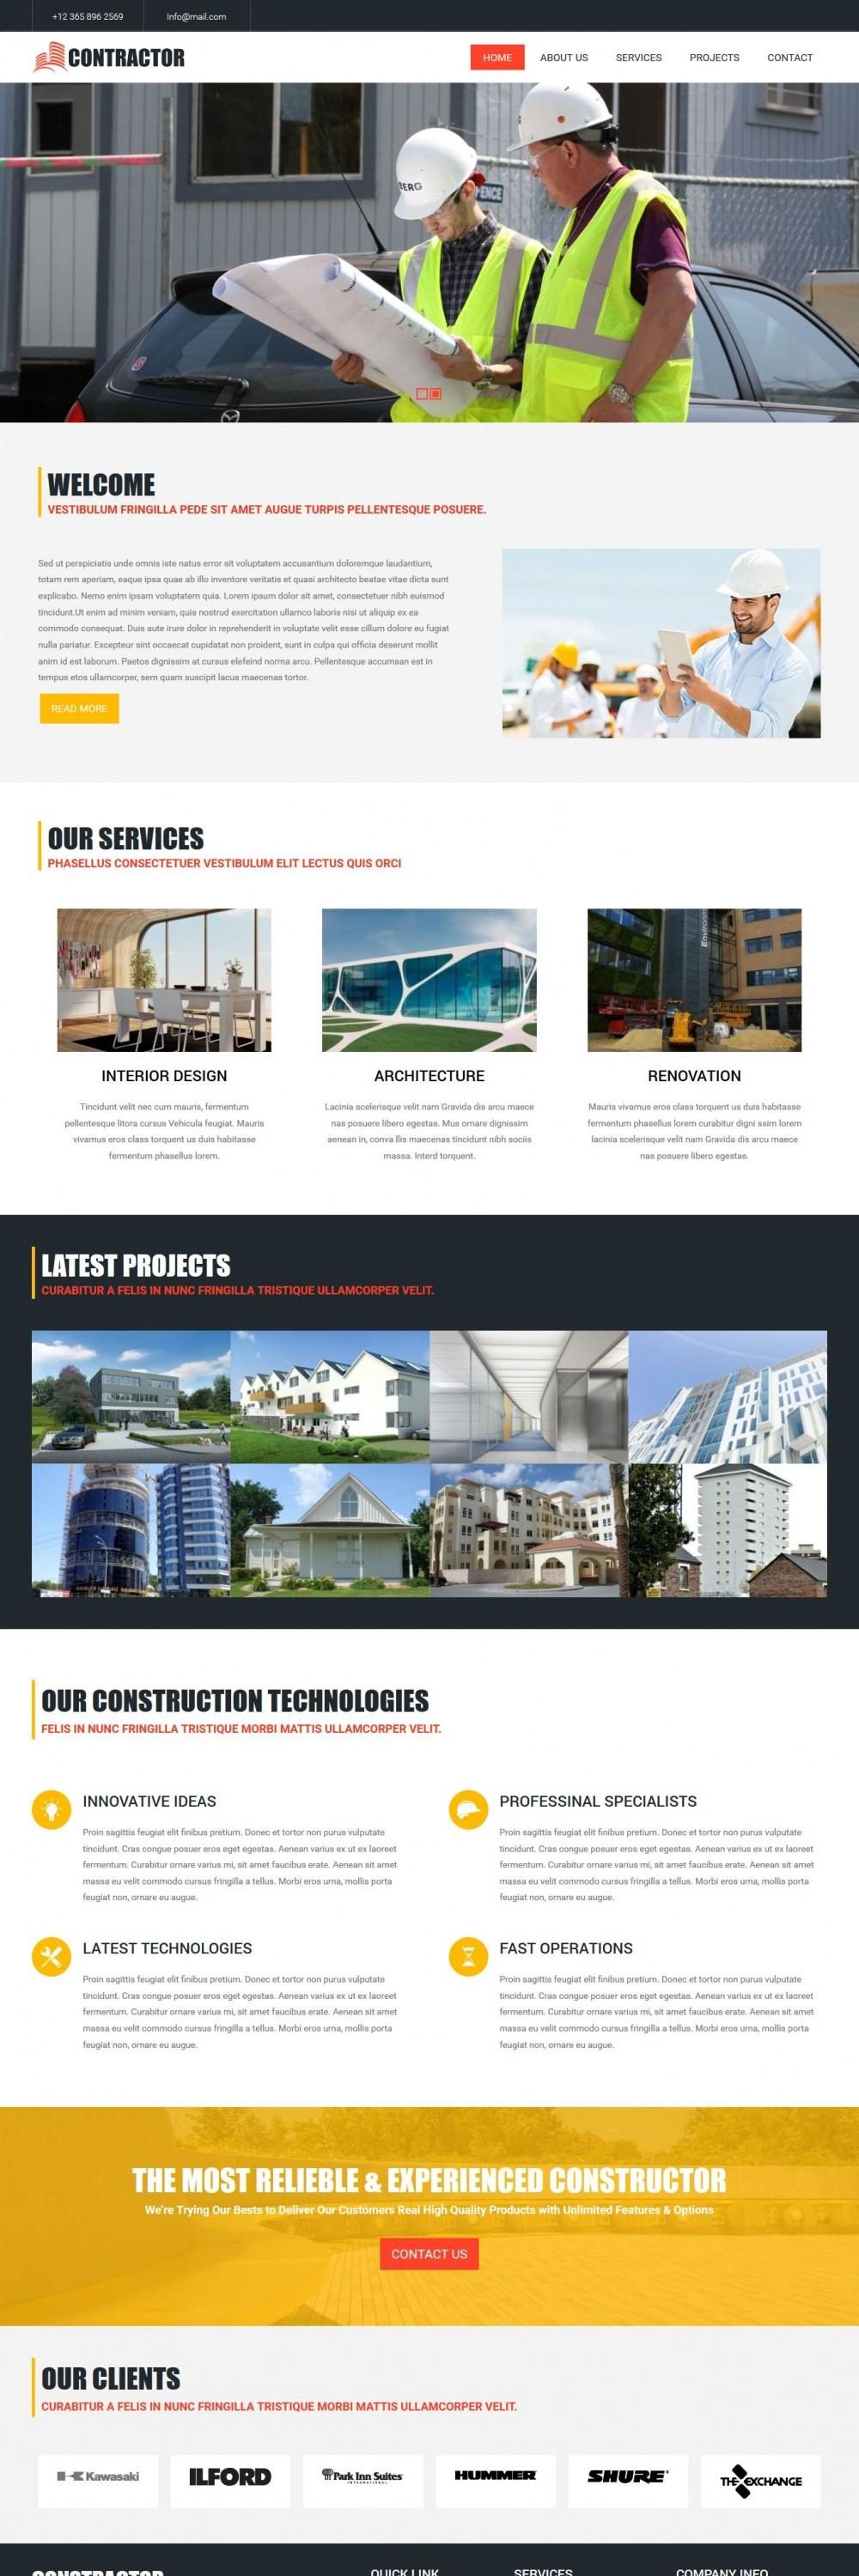 Contractor - Amazing WordPress Theme for Construction Business